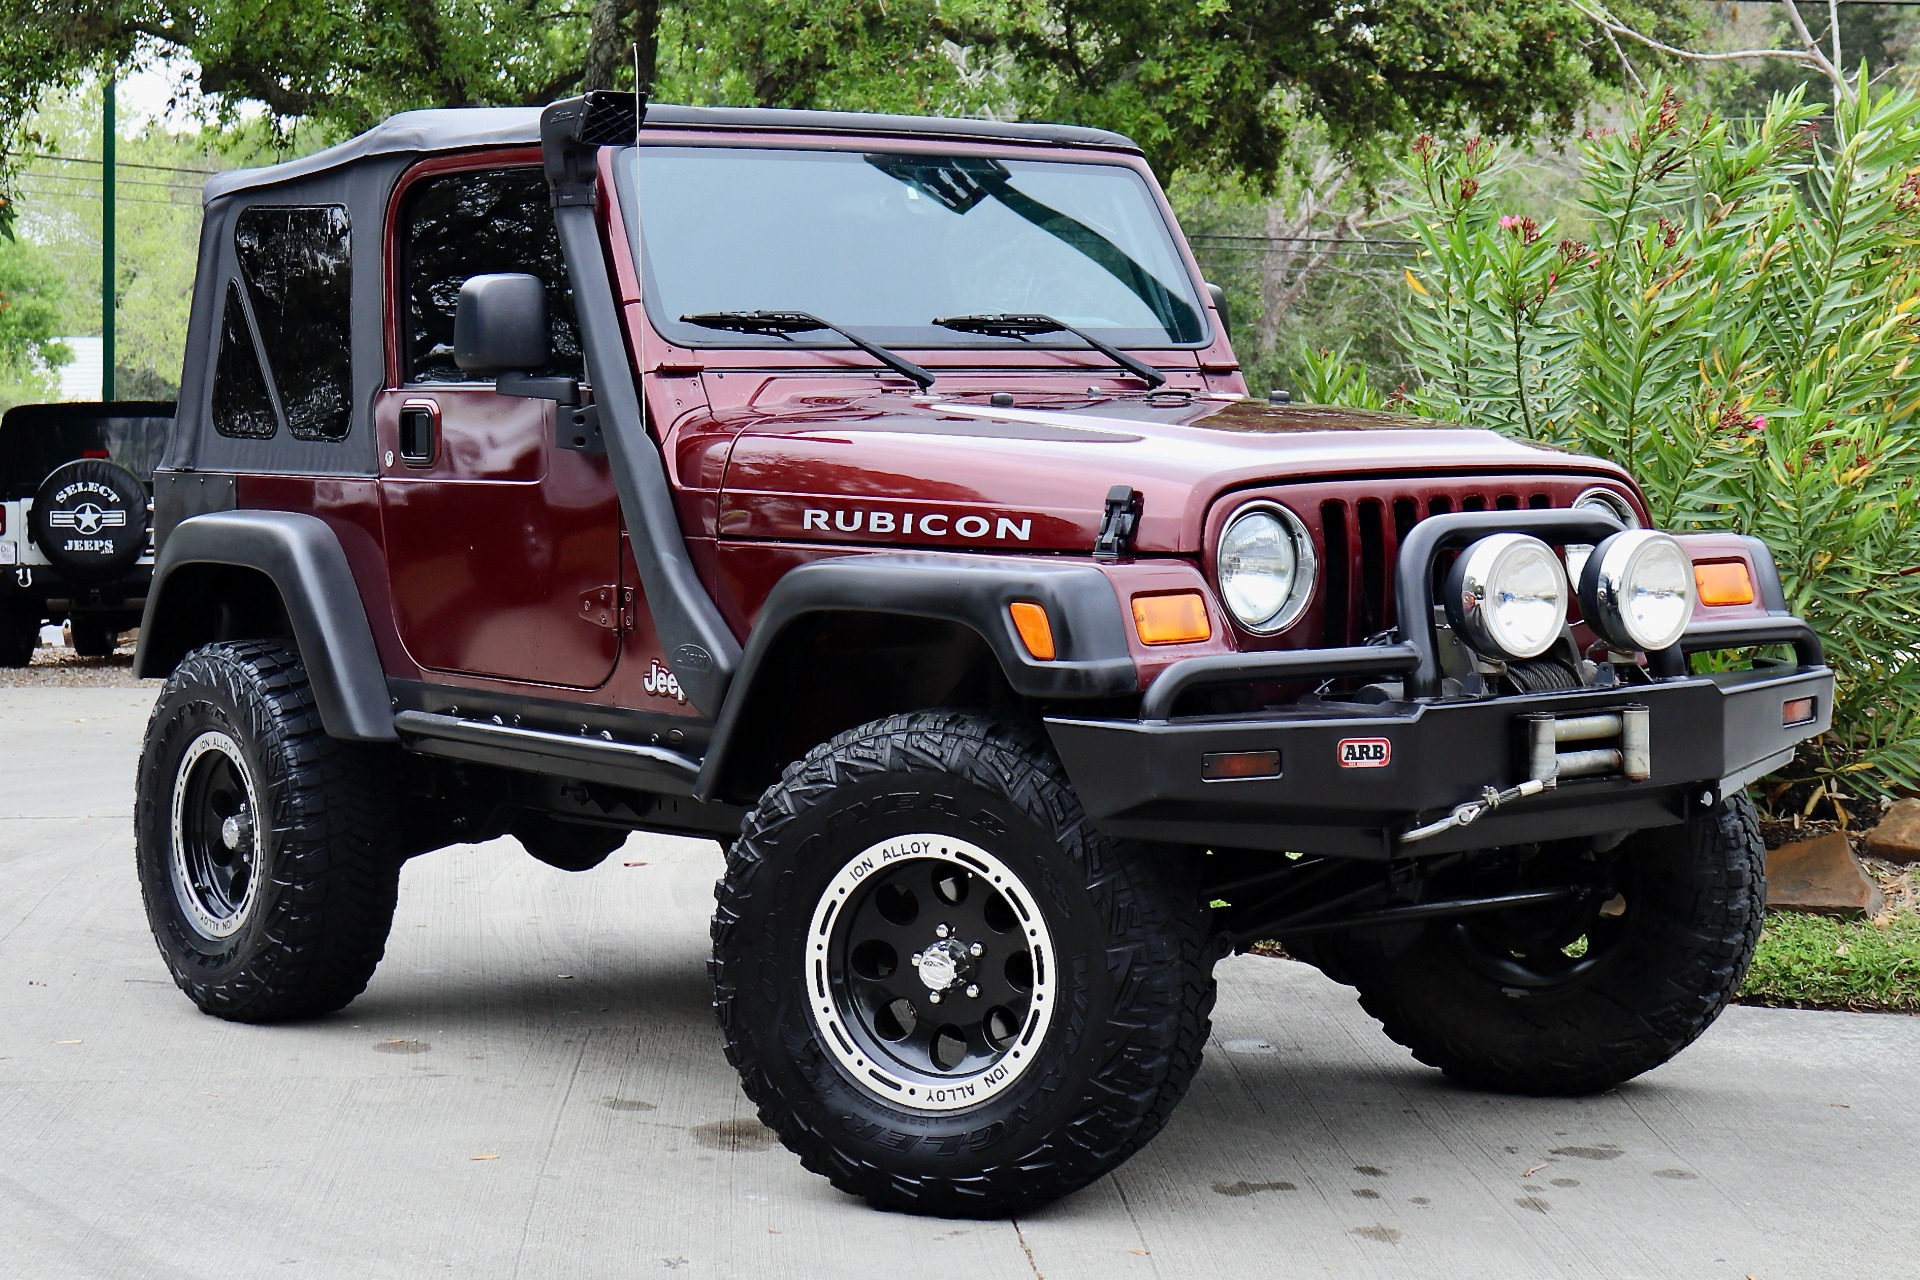 Used 2003 Jeep Wrangler Rubicon For Sale ($16,995) | Select Jeeps Inc.  Stock #353492